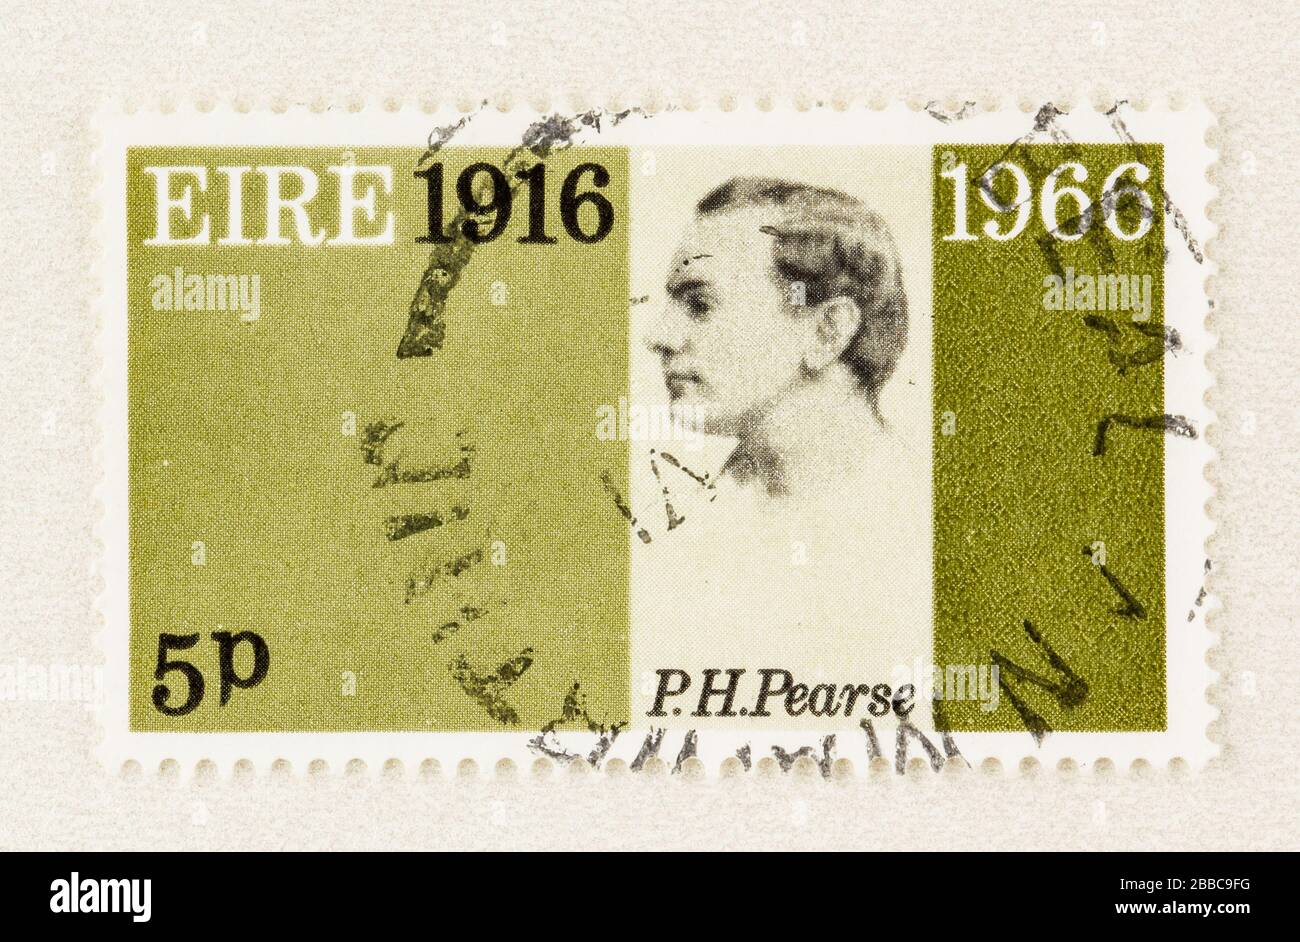 SEATTLE WASHINGTON - March 29, 2020: Close up of postage stamp from Ireland featuring portrait of P H Pearse, a member of the Easter Week Rebellion. S Stock Photo